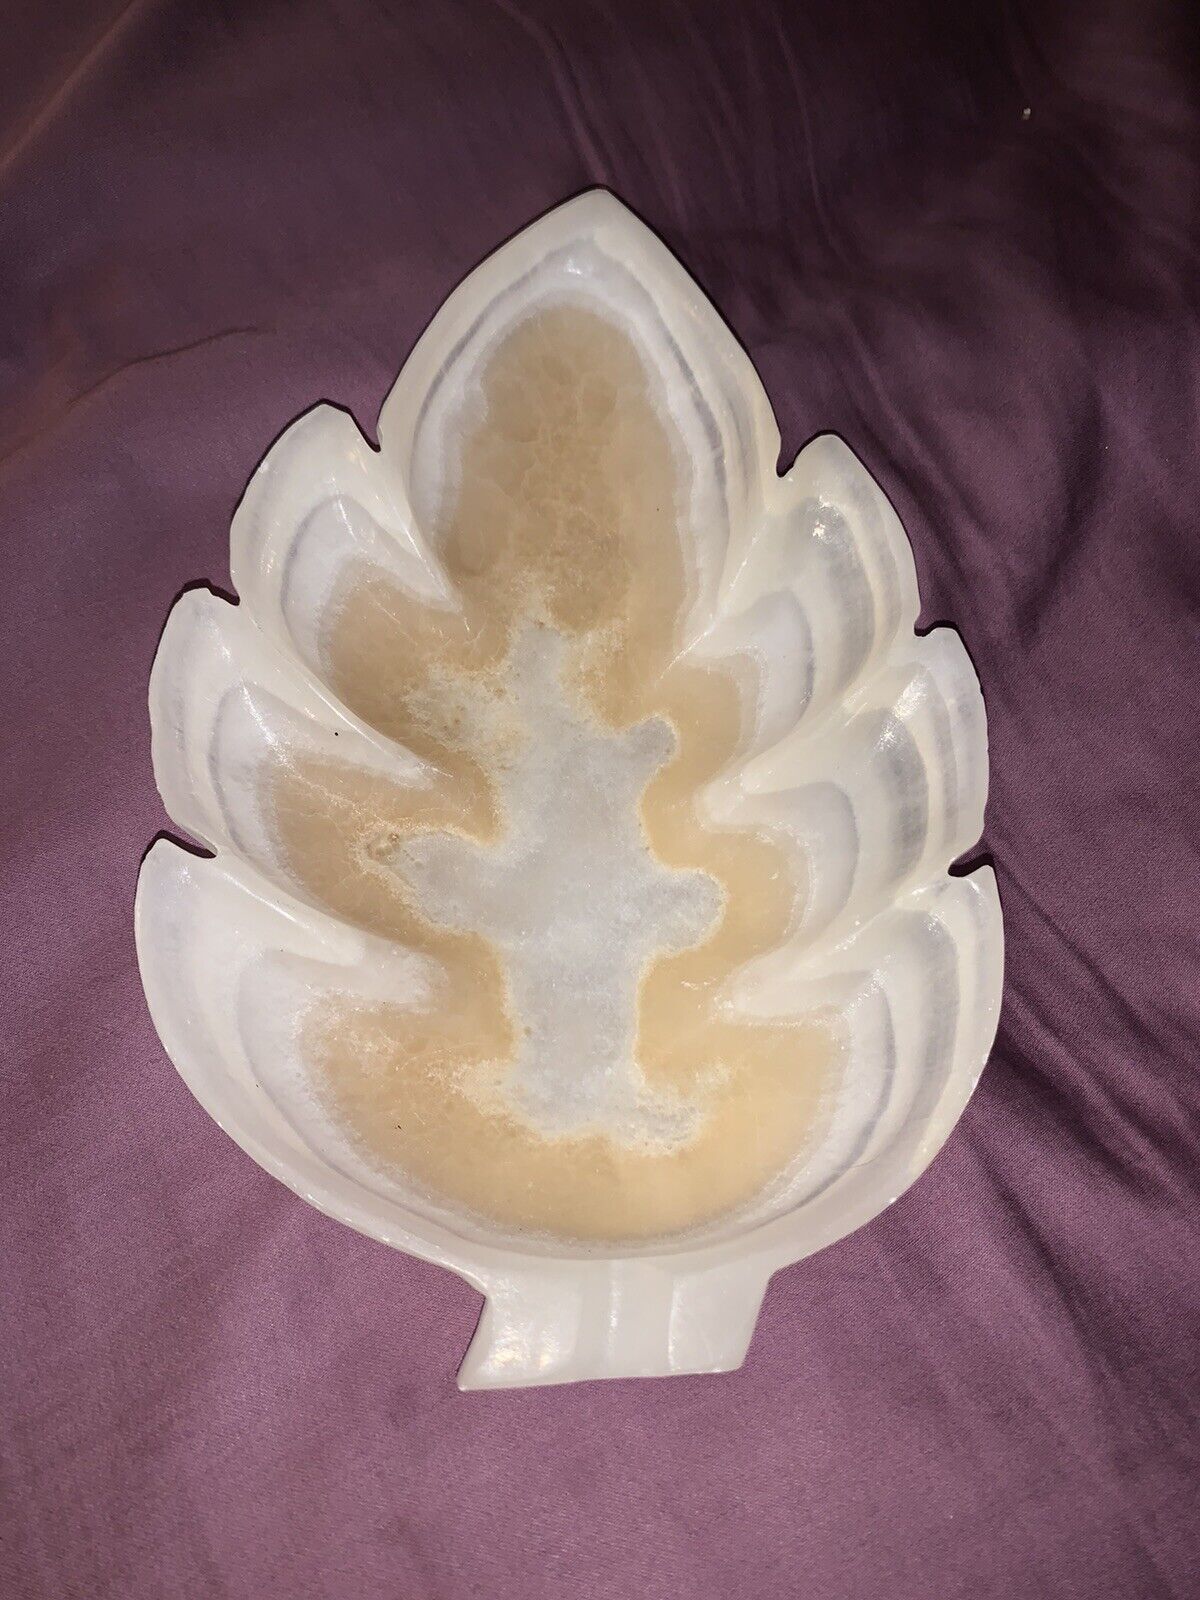 Antique Hand-carved Solid Marble Leaf Shaped Bowl Or Ashtray. Unique! 8”x5”x1.5”